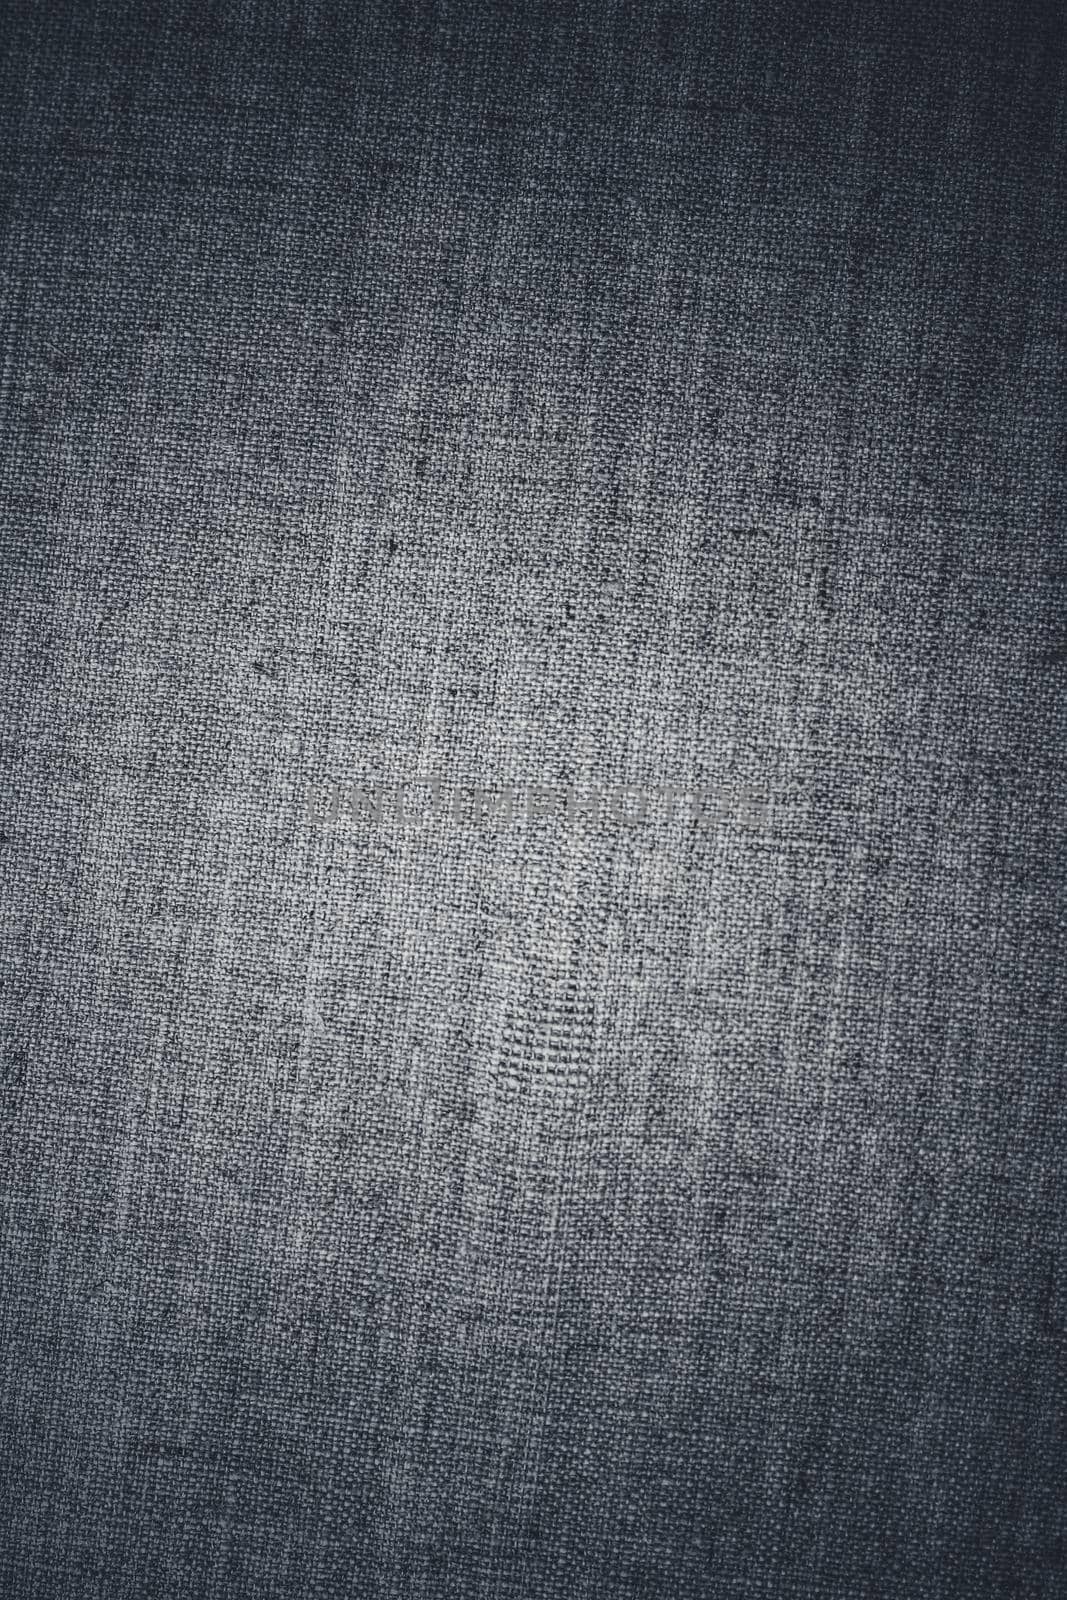 Decorative gray linen fabric textured background for interior, furniture design and art canvas backdrop by Anneleven